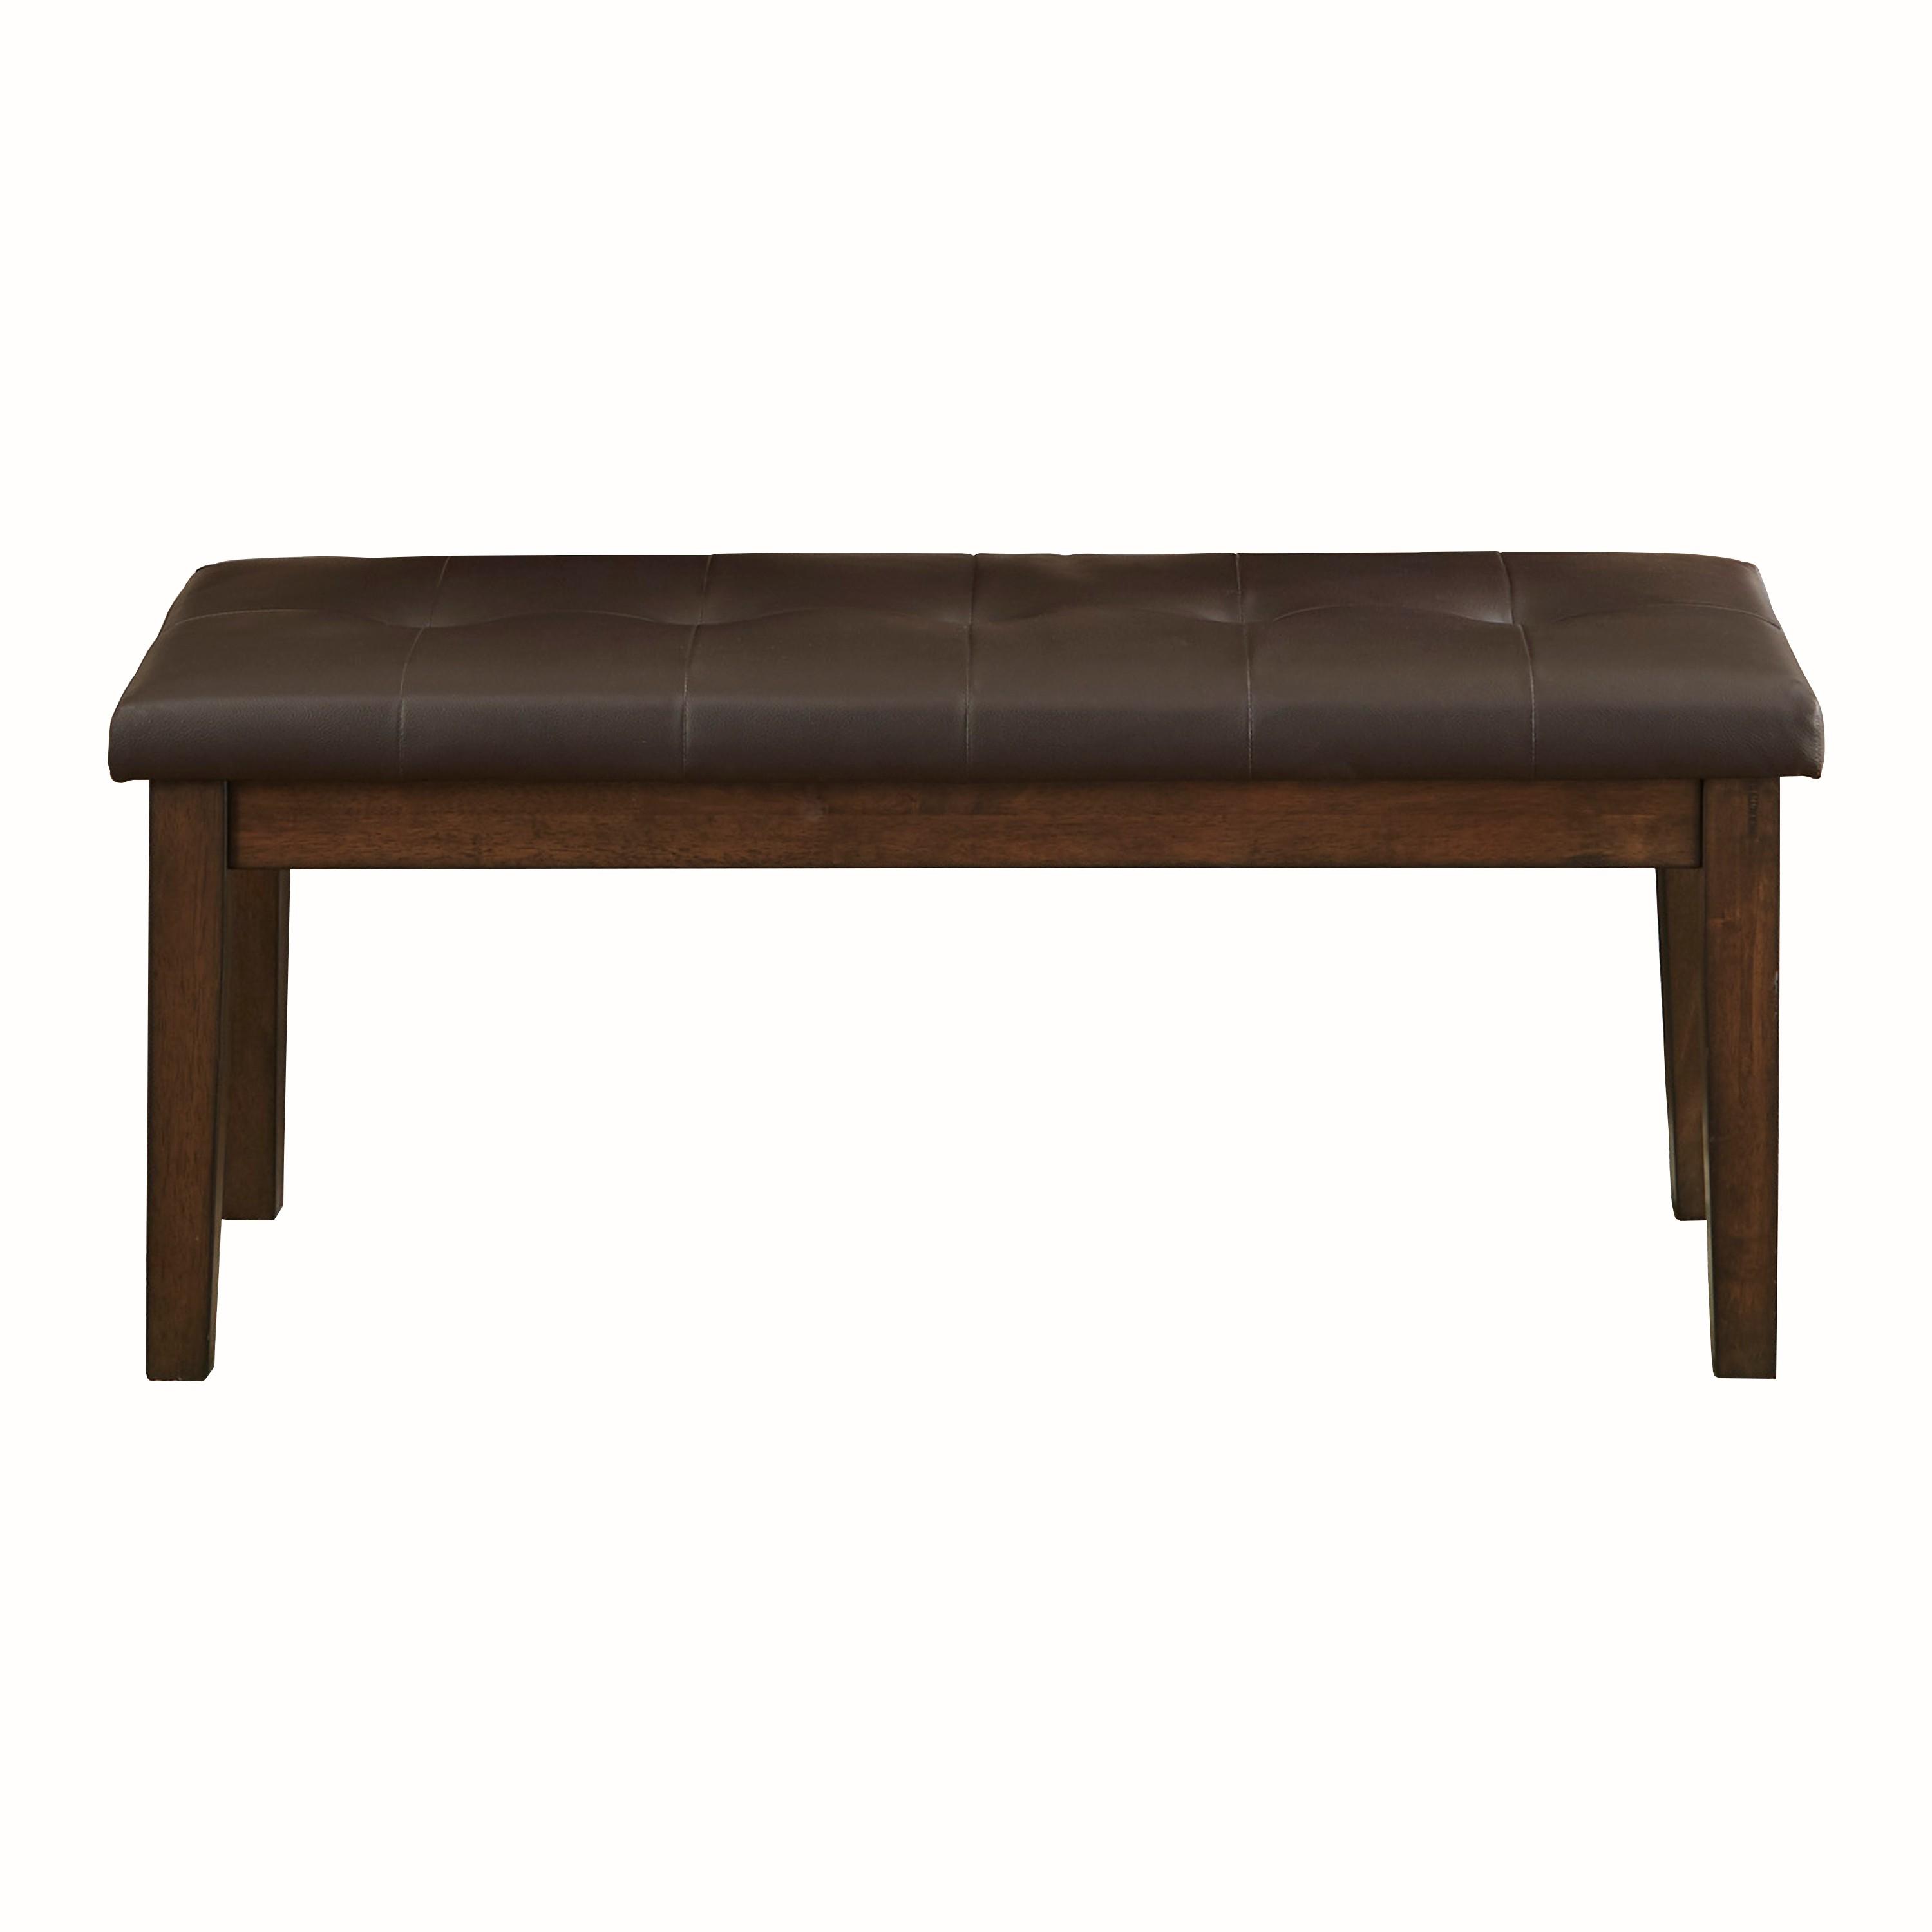 

    
Transitional Light Rustic Brown Wood Bench Homelegance 5614-13 Wieland
